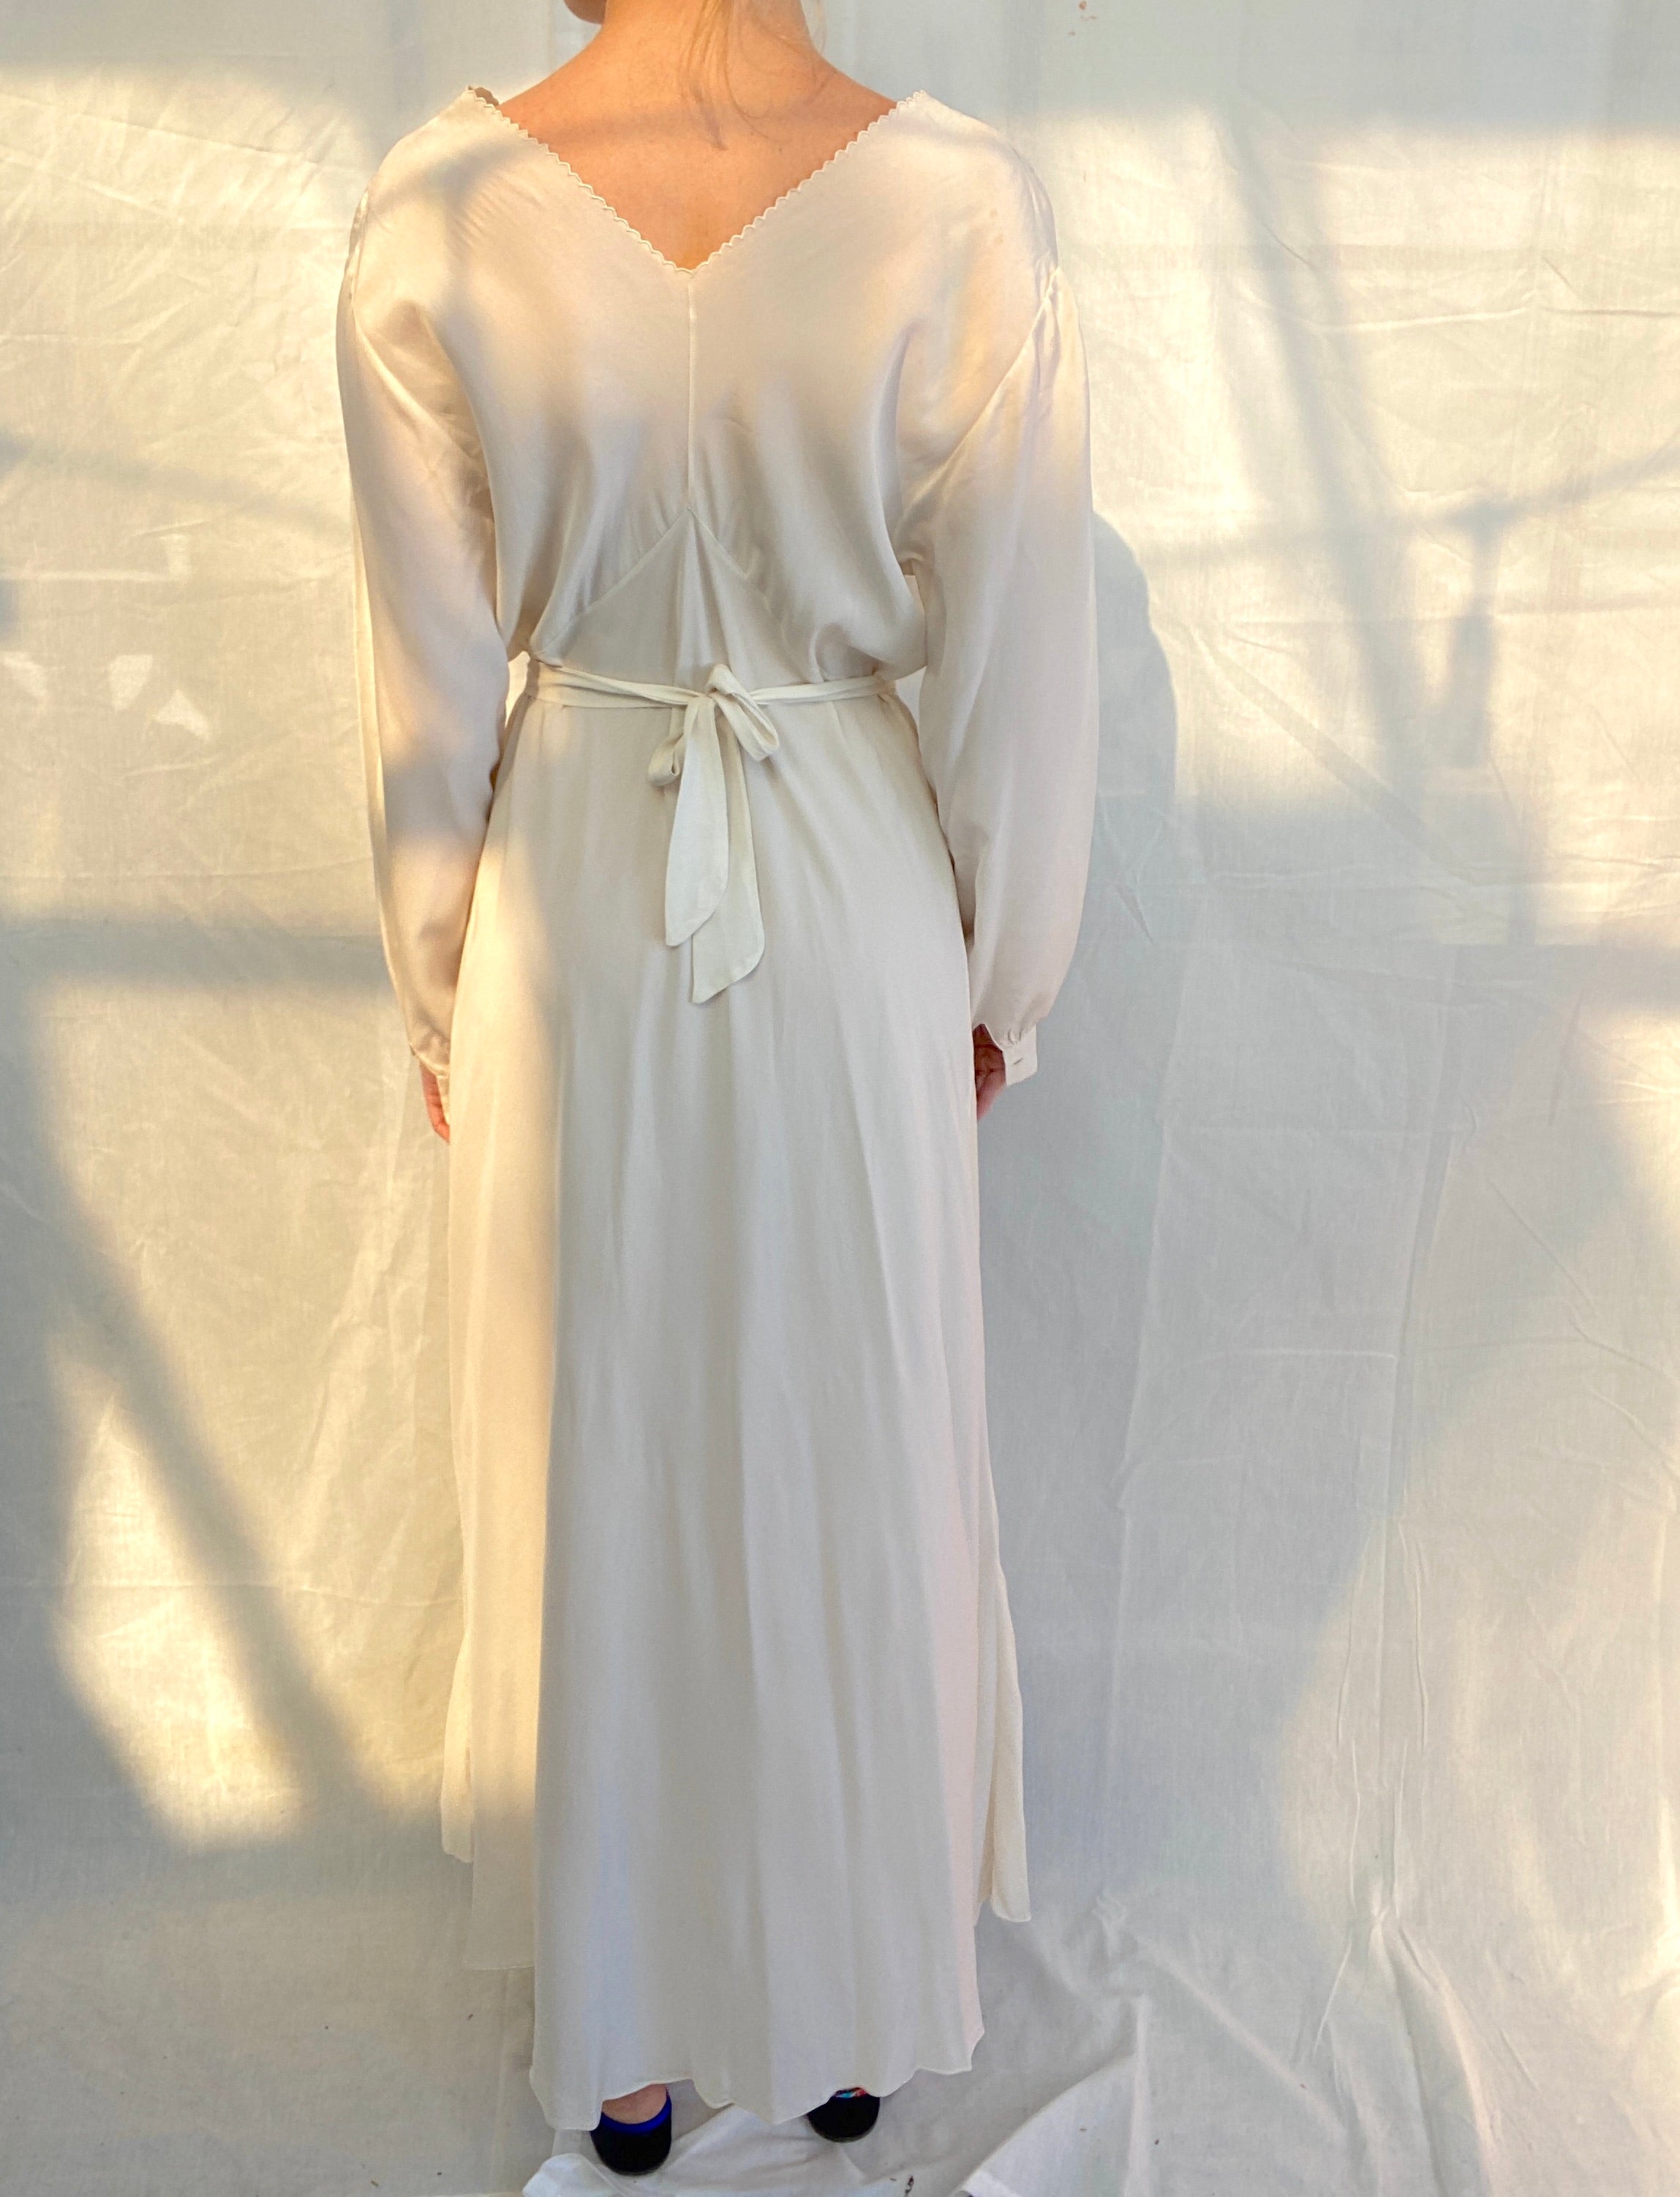 1930's Italian Long Sleeve Silk Dress with Delicate Floral and Bow Embroidery